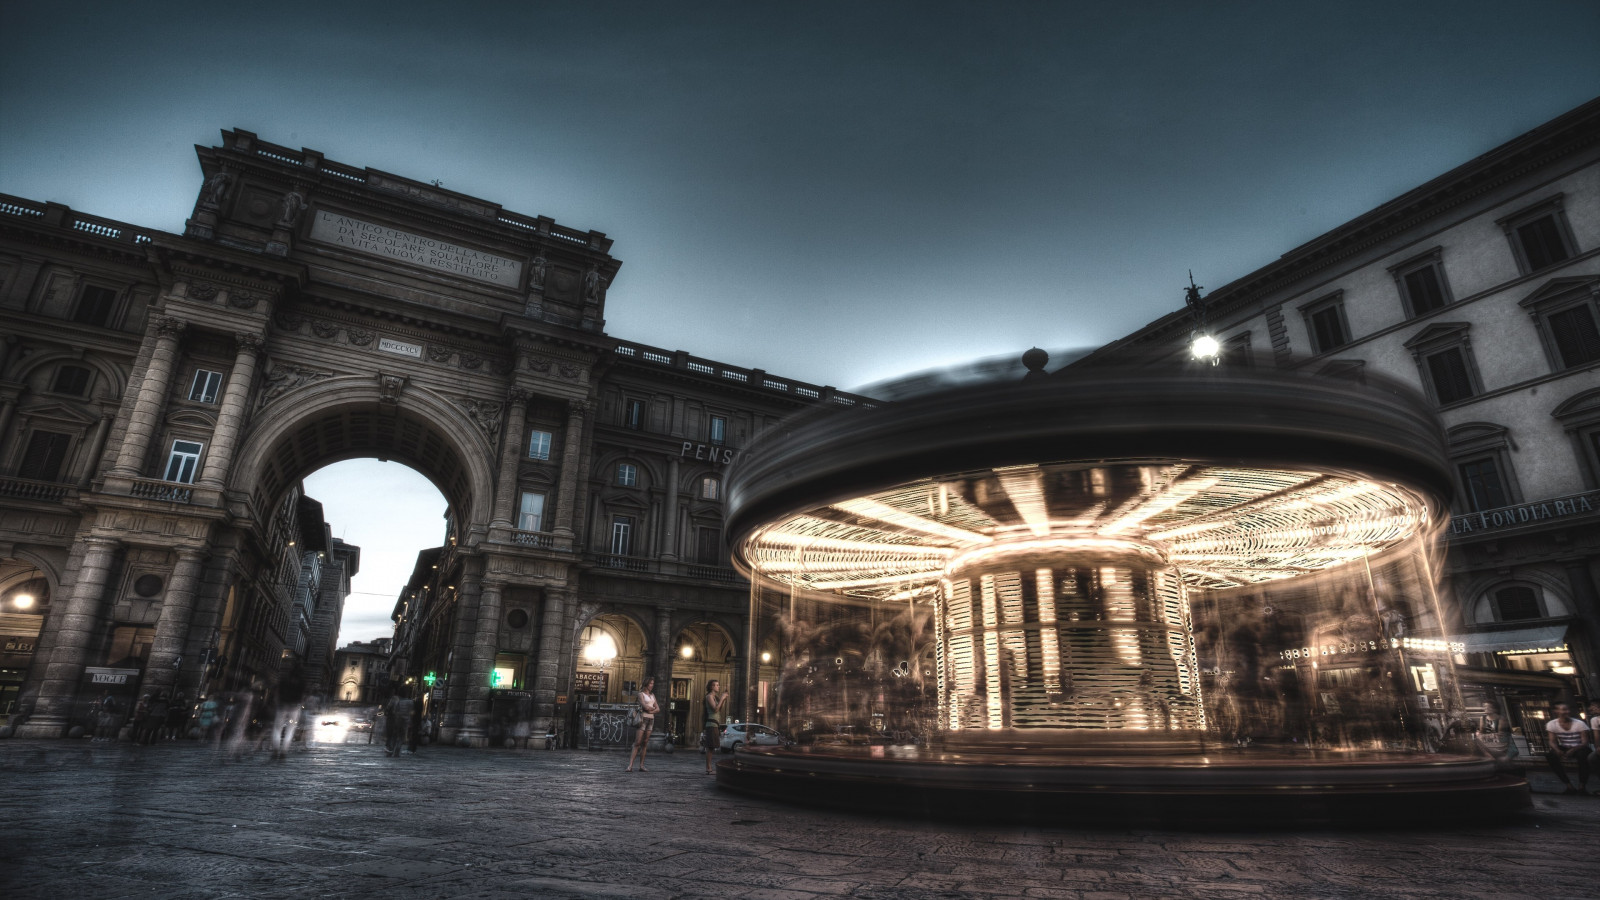 Carousel, people and buildings from Florence wallpaper 1600x900